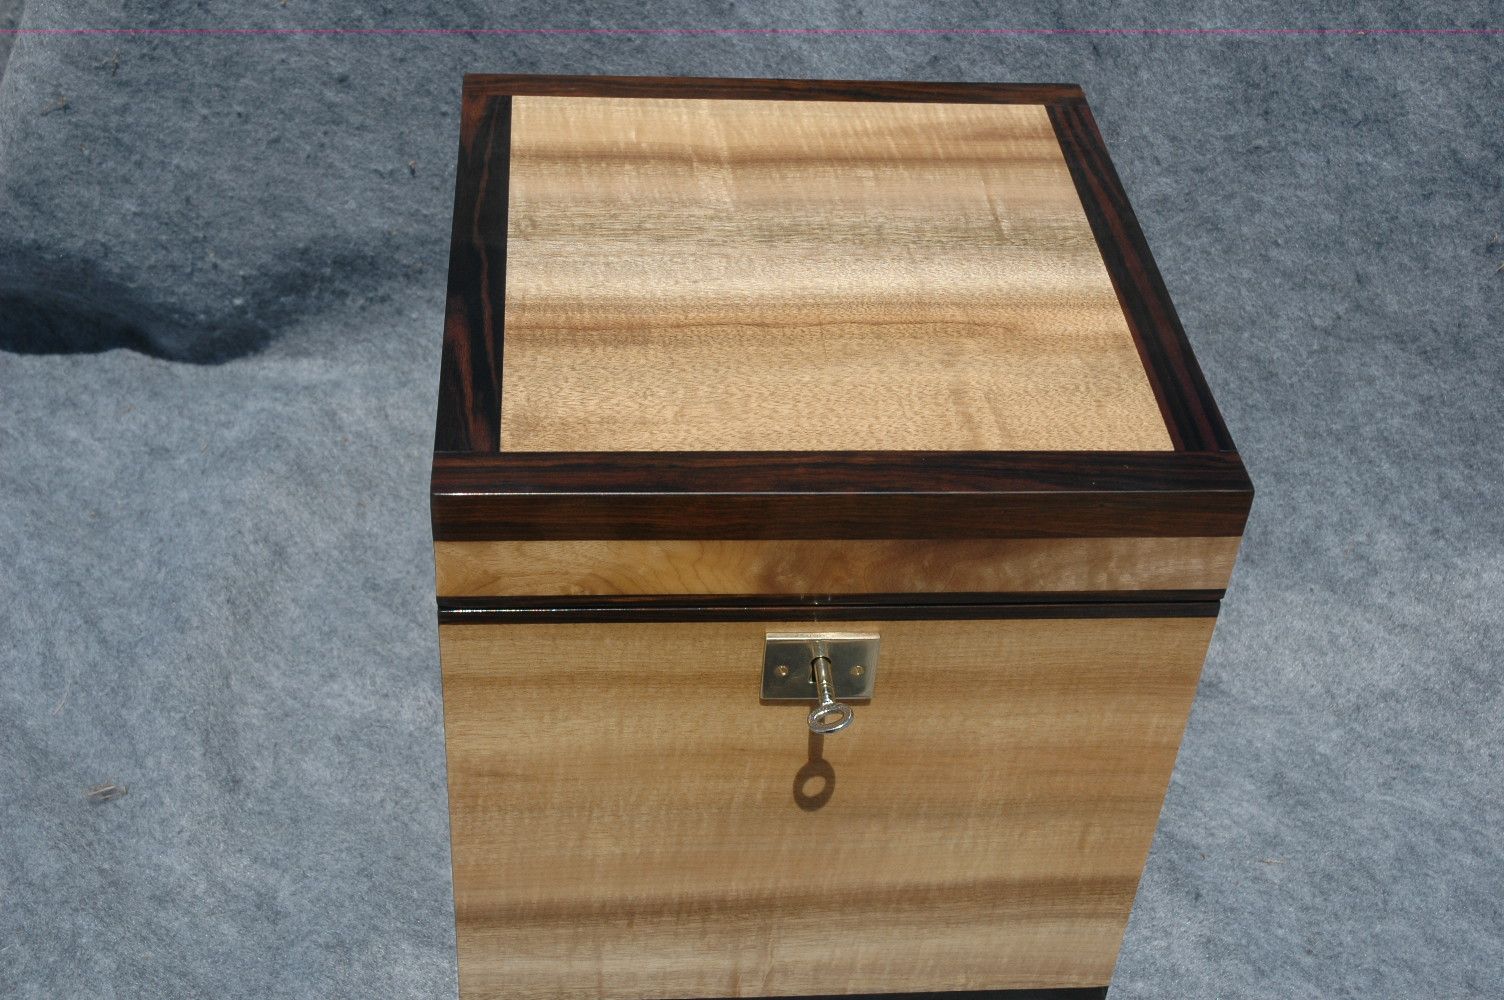 wooden urn with lock and handles